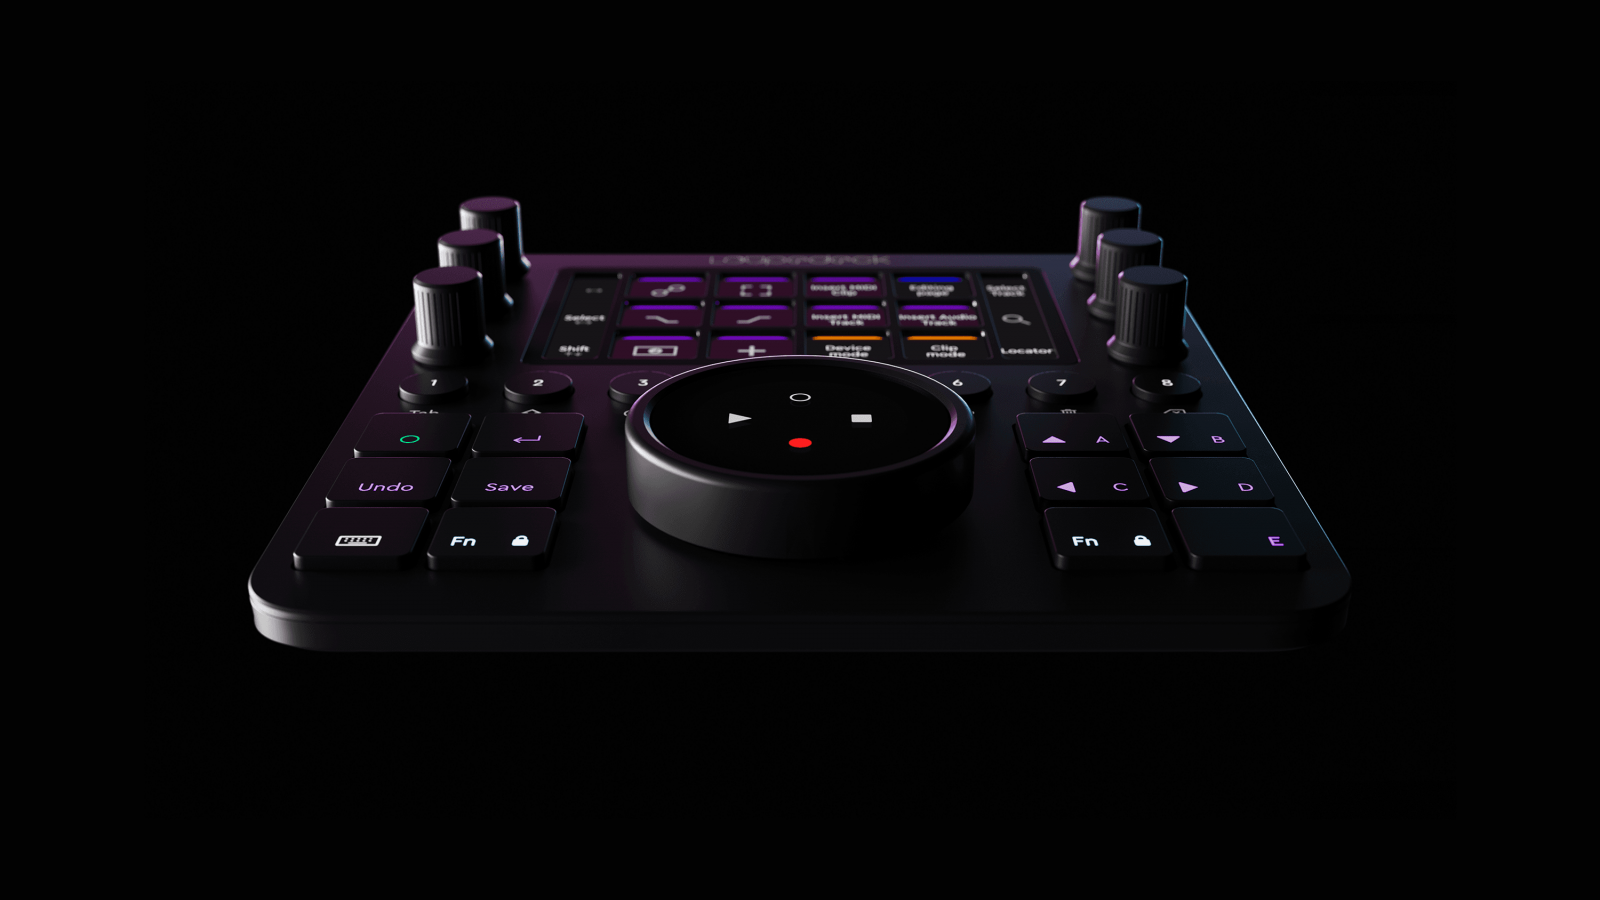 Loupedeck - Seamless design experience for professionals